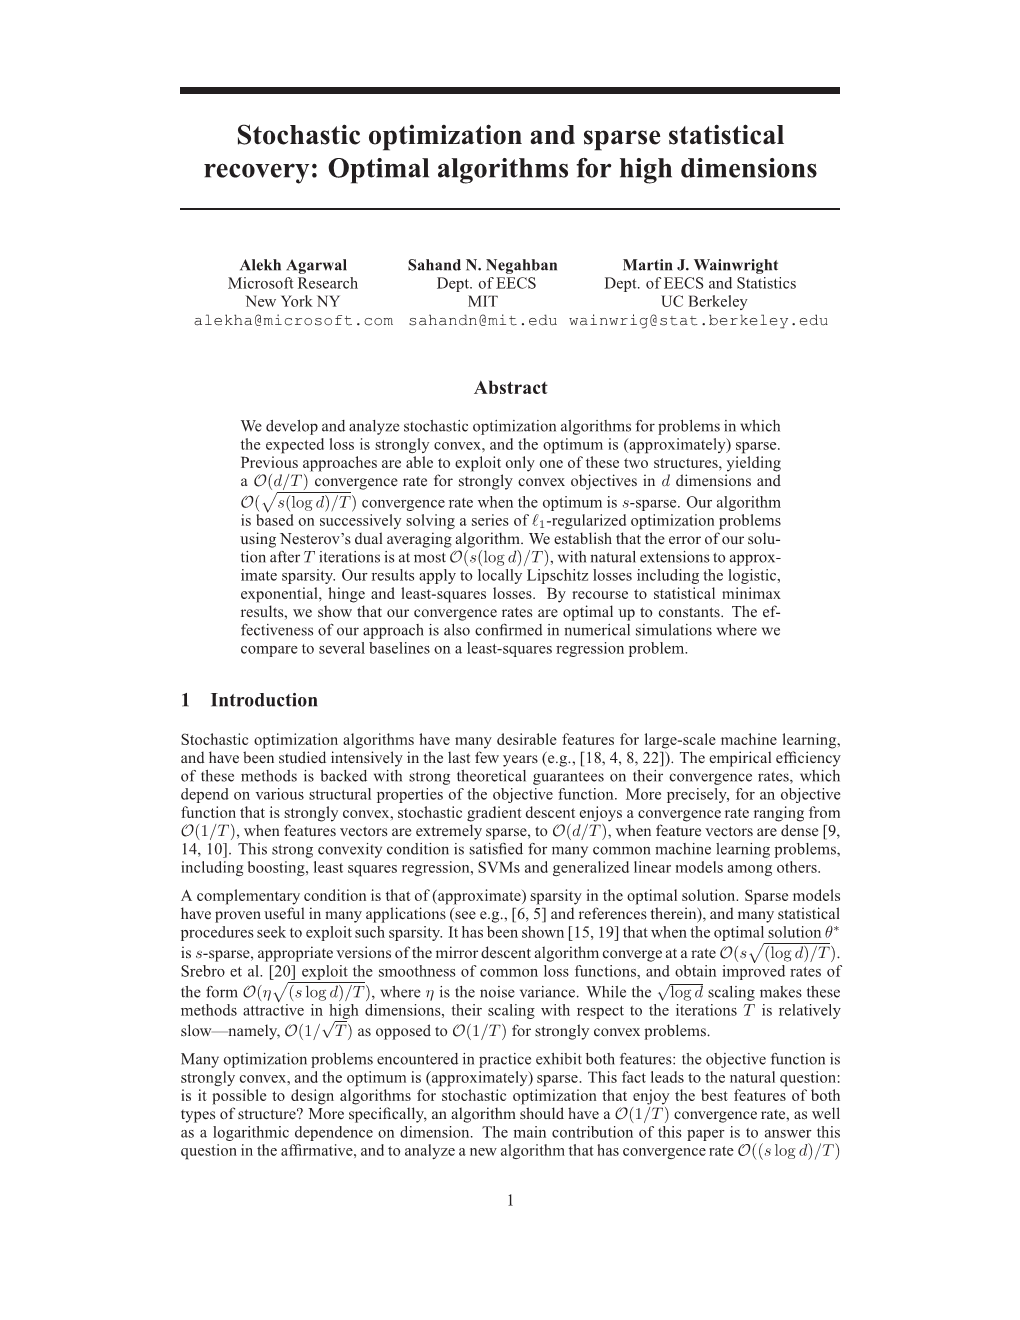 Stochastic Optimization and Sparse Statistical Recovery: Optimal Algorithms for High Dimensions